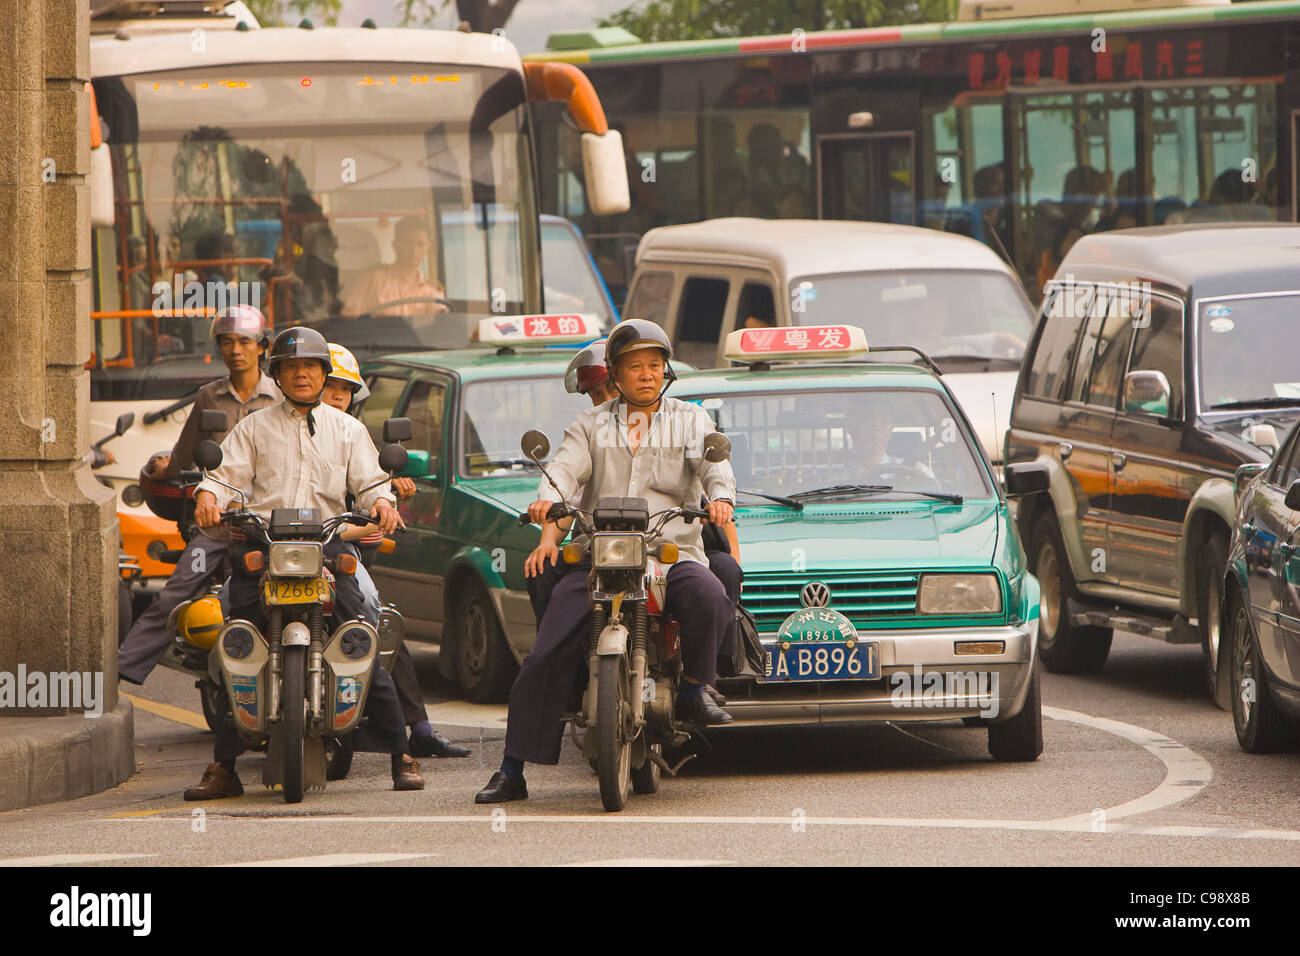 GUANGZHOU, GUANGDONG PROVINCE, CHINA - Scooters, taxis and buses wait at traffic light, in city of Guangzhou. Stock Photo